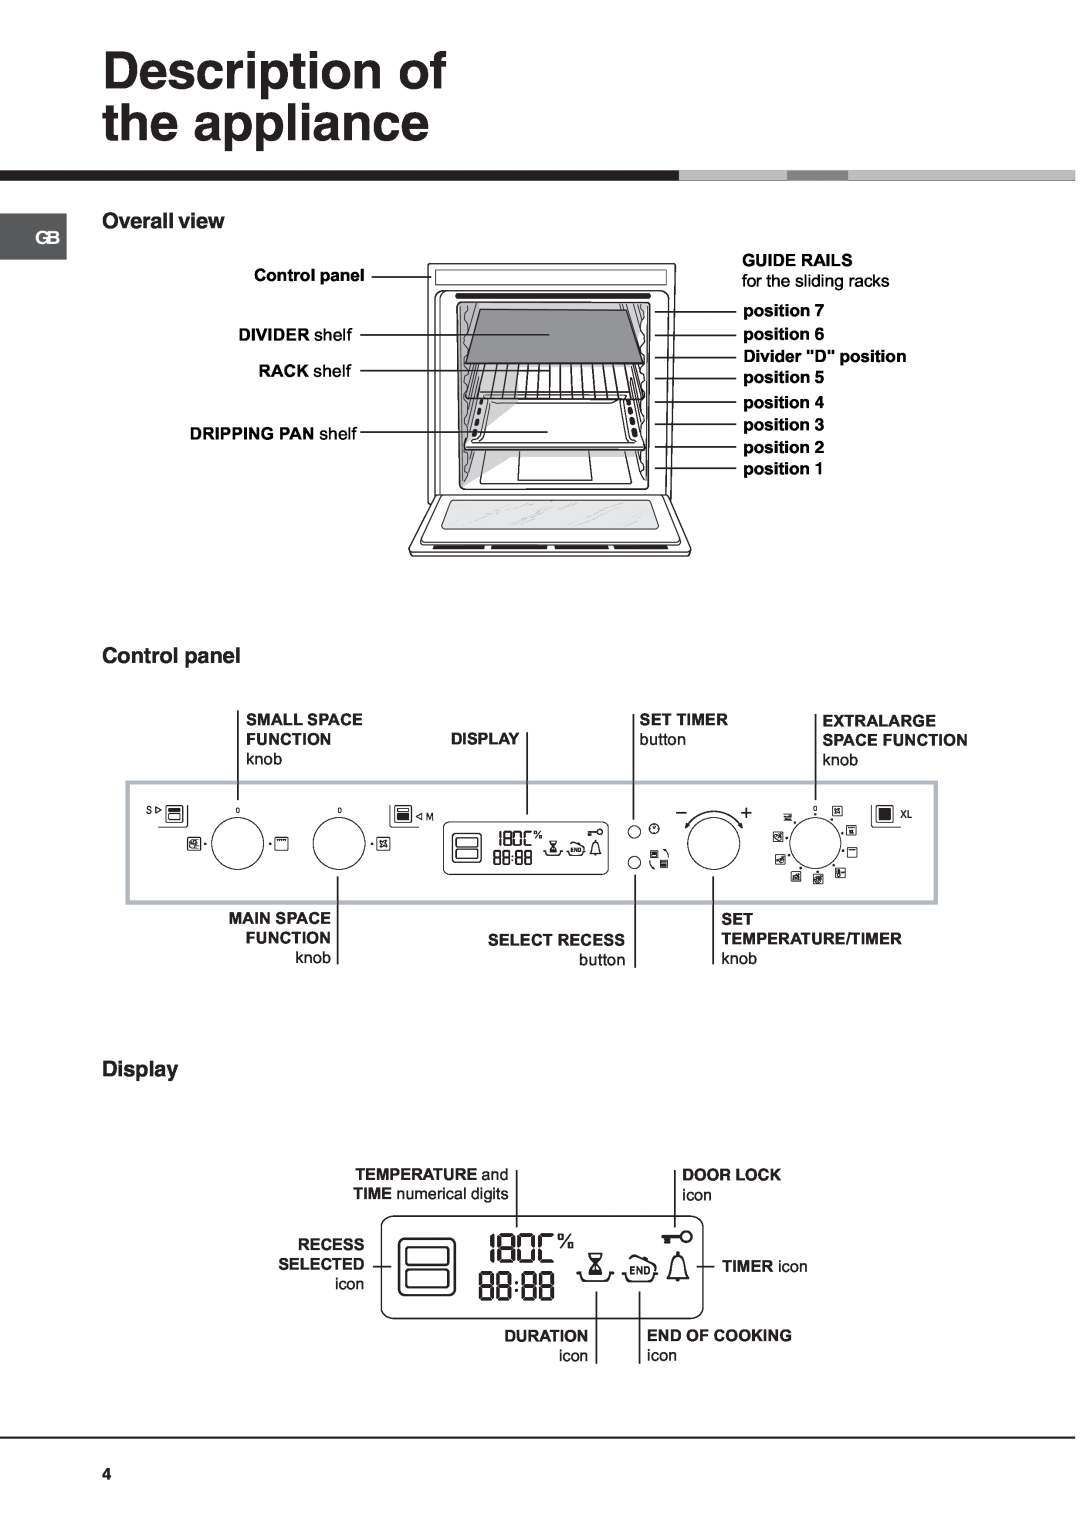 Hotpoint OS Description of the appliance, Overall view, Control panel, Display, Guide Rails, for the sliding racks, button 